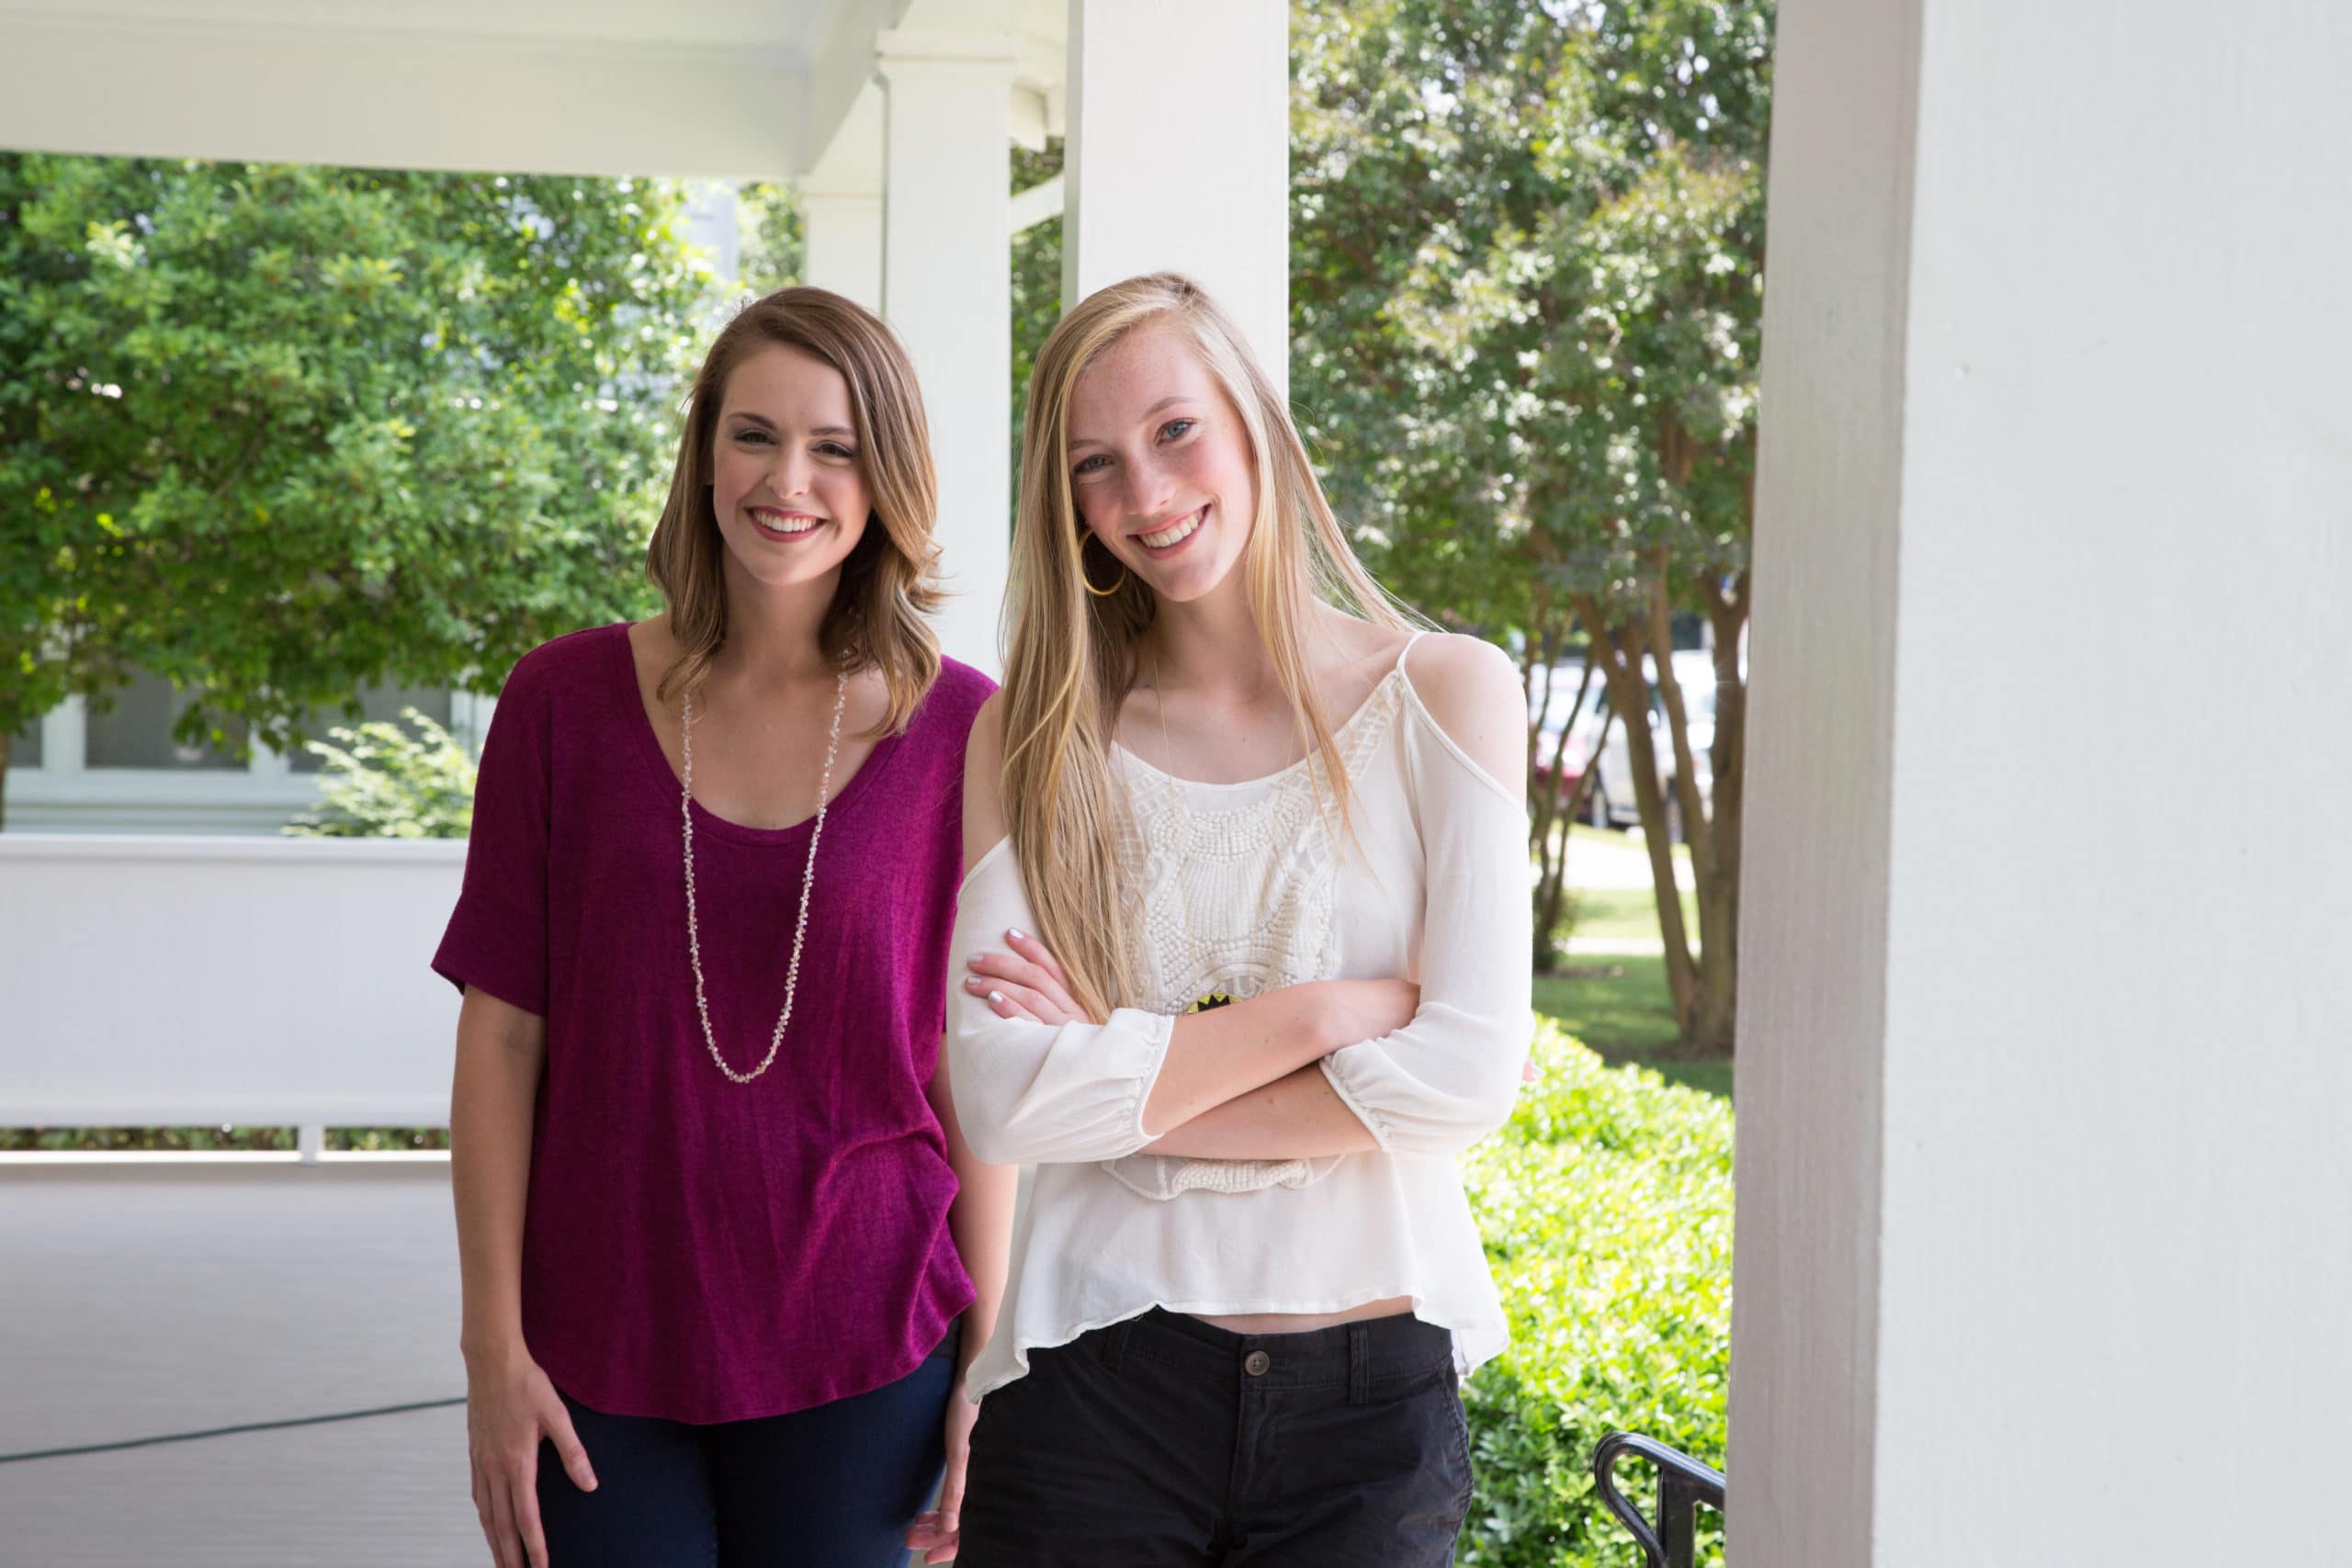 Two teen girls smiling and standing on a porch.